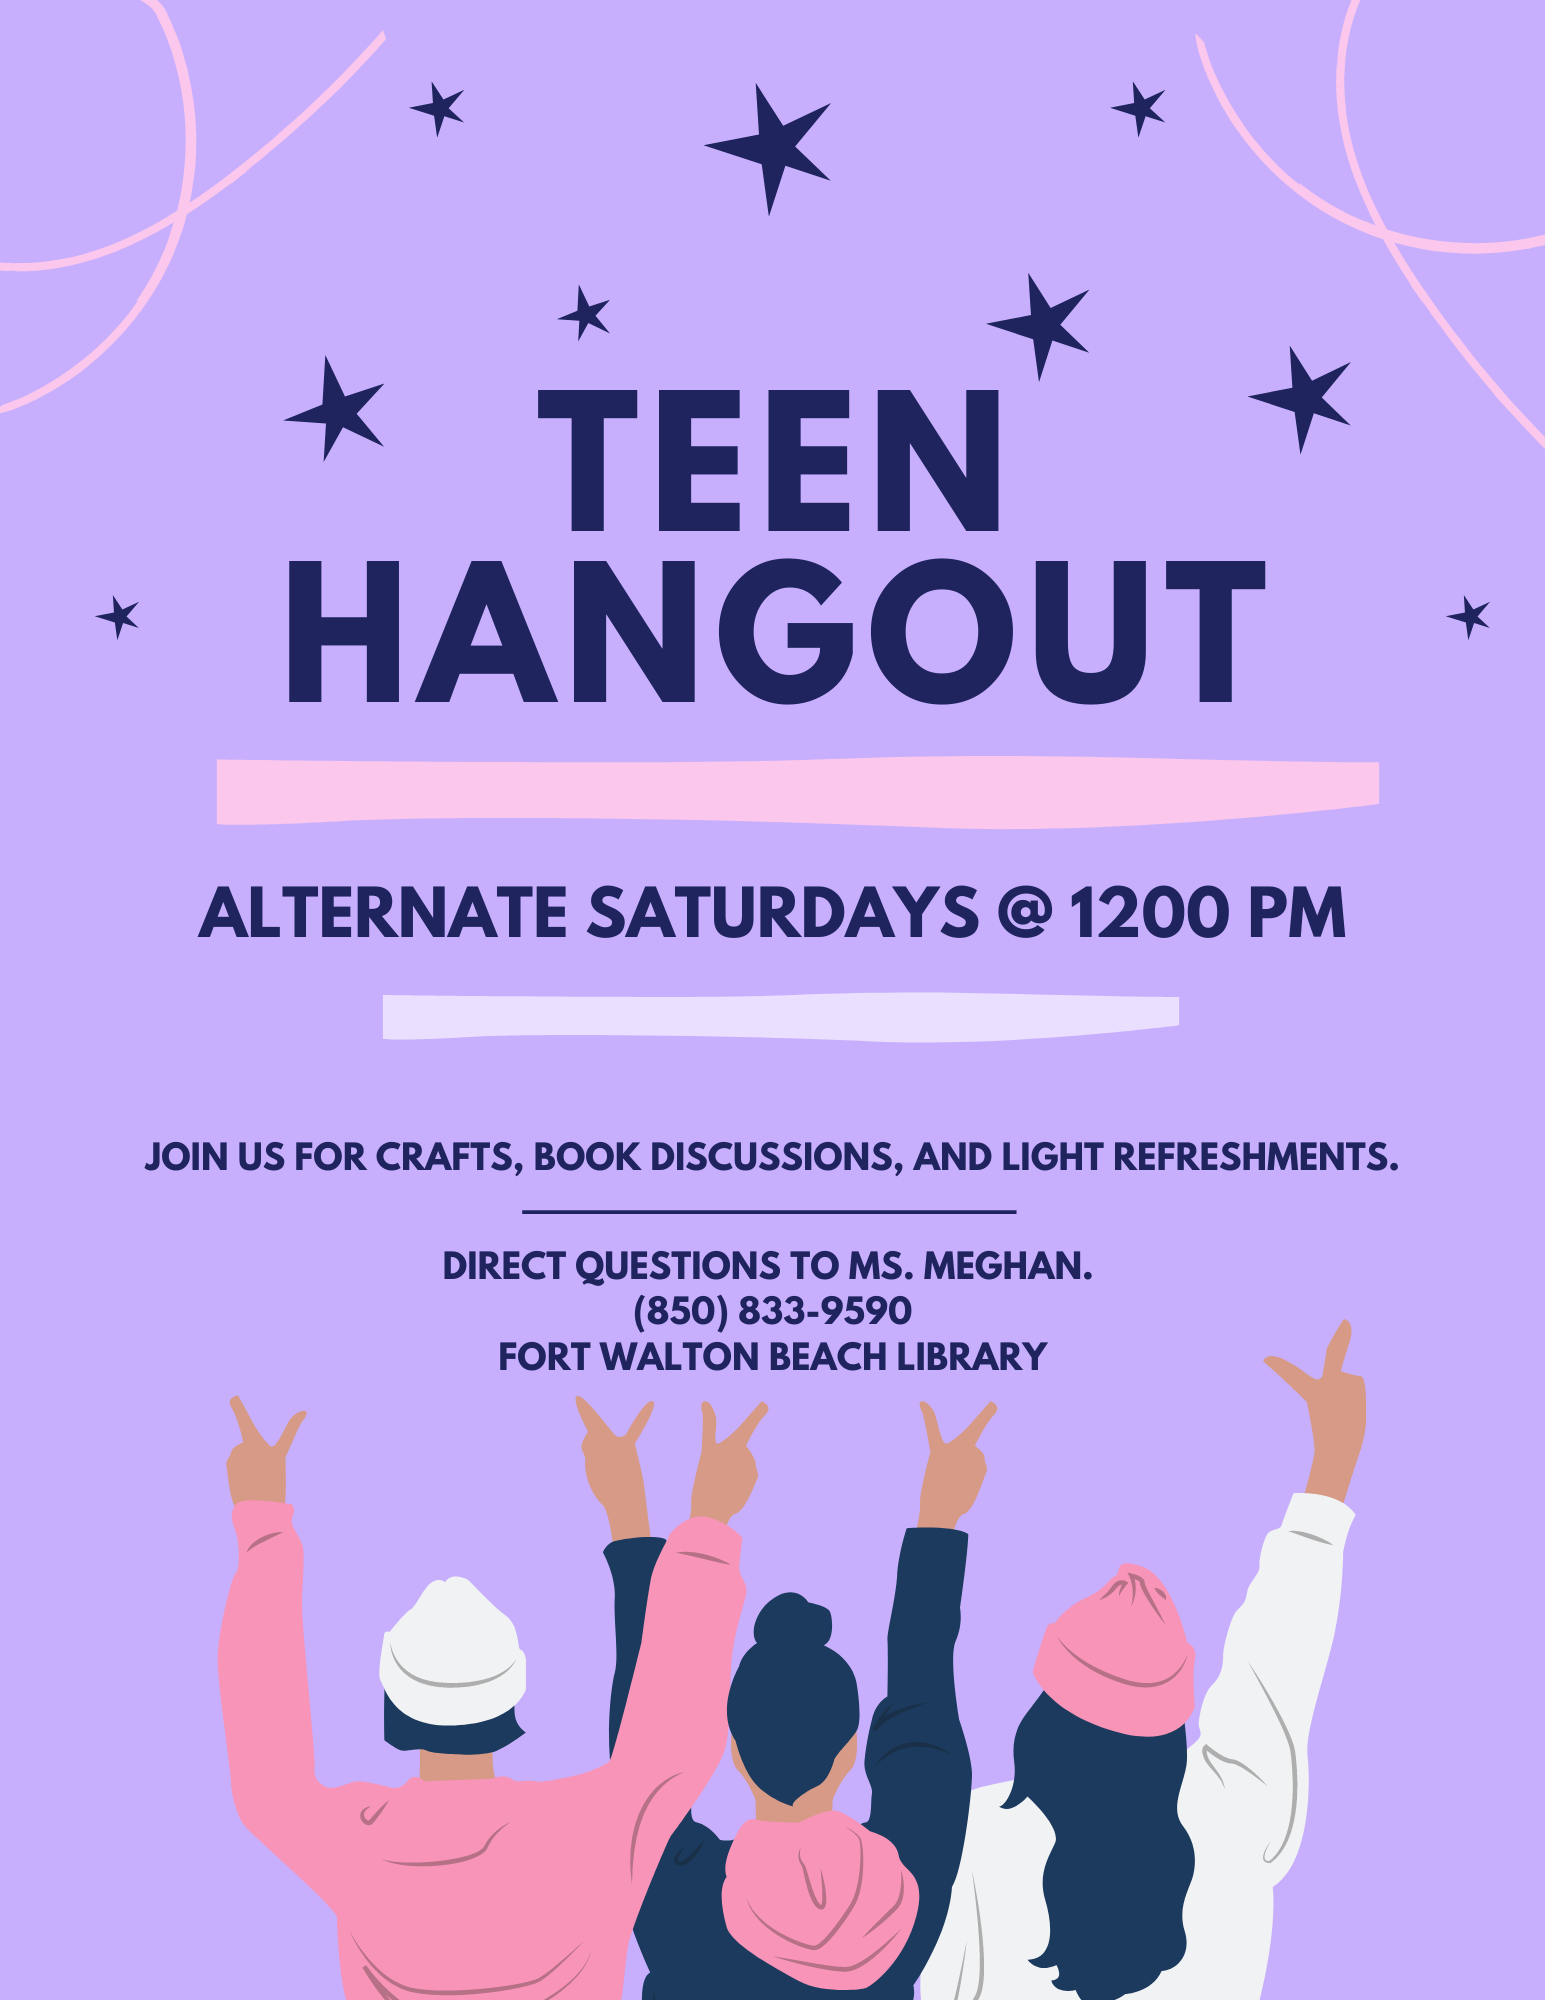 A flyer with a purple background and white, pink, and purple accents. The flyer reads "Teen Hangout" and provides that the meetings will be on alternate Saturdays at 12:00 pm. 